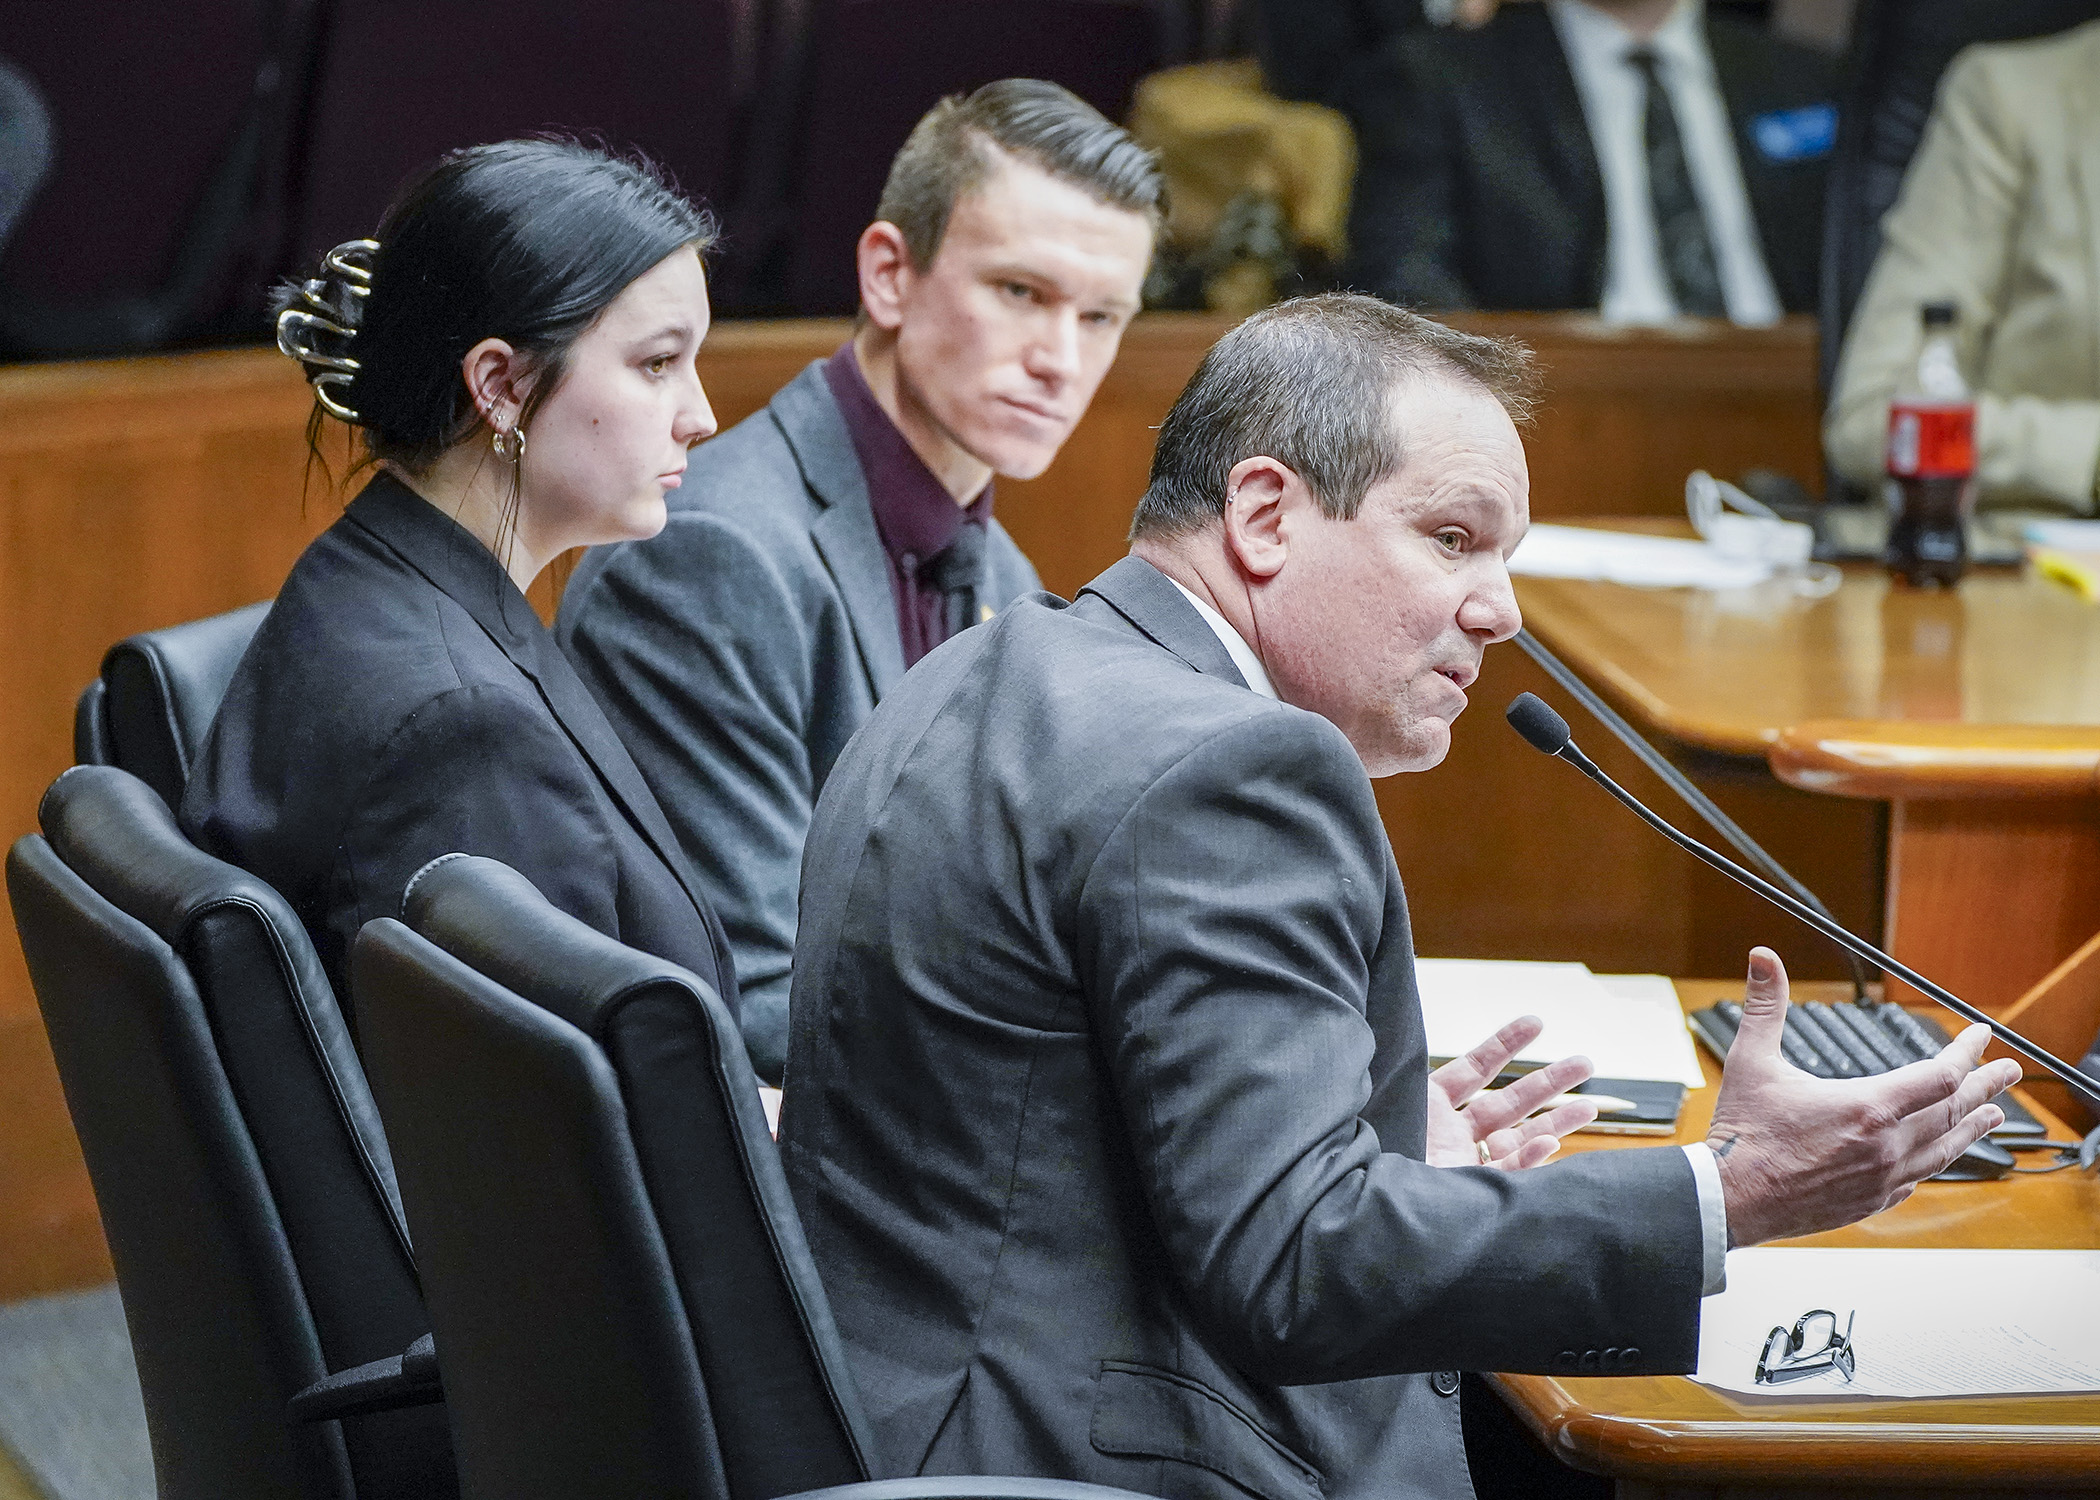 P.E.A.S.E. Academy Director Michael Durchslag testifies with Class of 2024 student Lucy Getschow before the House Education Finance Committee Feb. 22 in support of a bill to increase approved recovery program grant amounts. (Photo by Andrew VonBank)